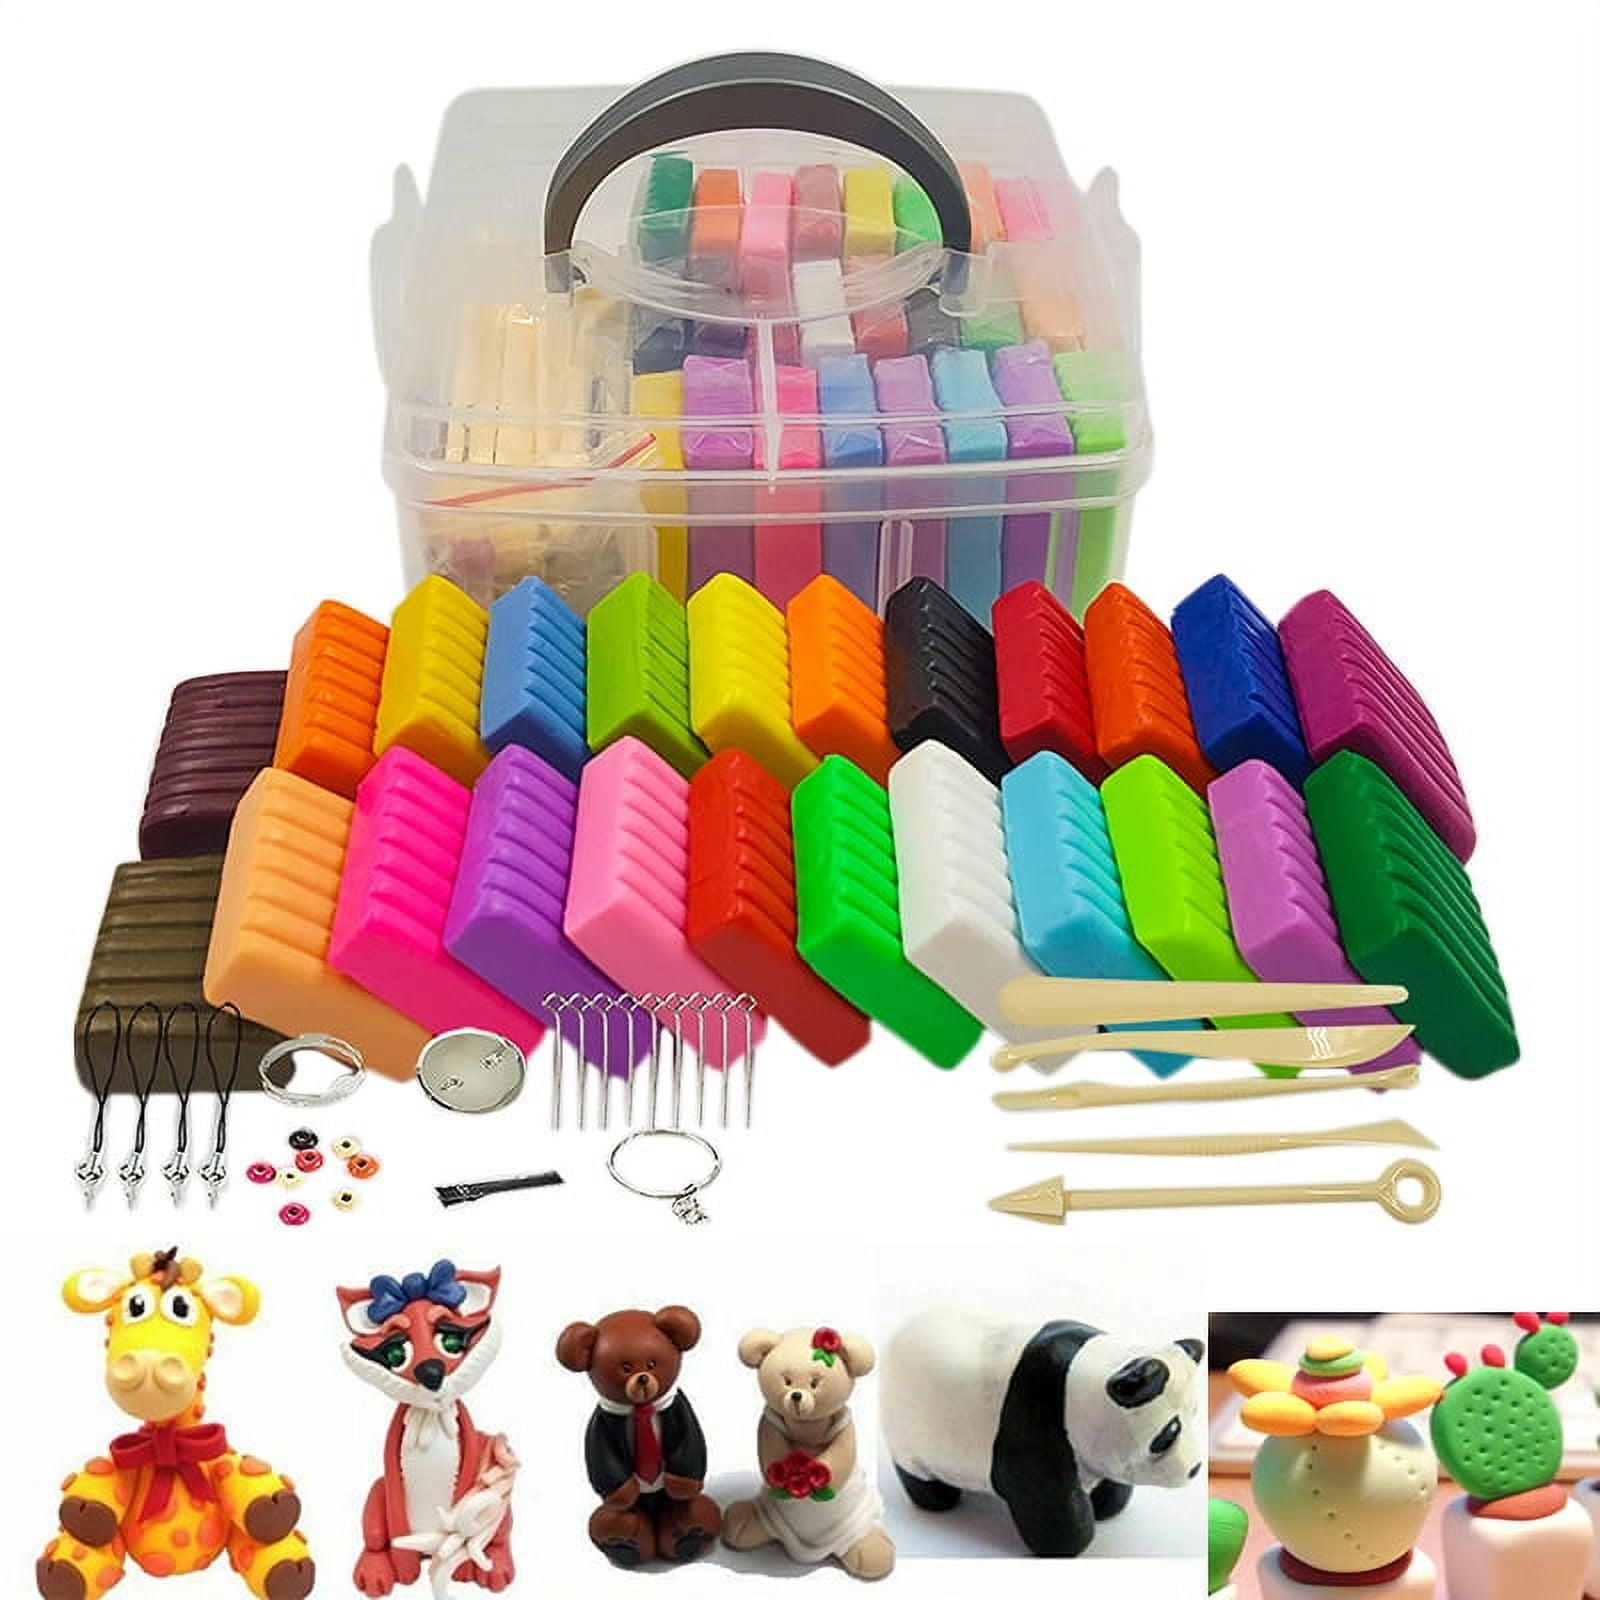 24 Colors Soft Polymer Clay Set Oven Bake DIY Air Dry Colored Clay  Plasticine with Modeling Making Tools Kids Educational Toy 